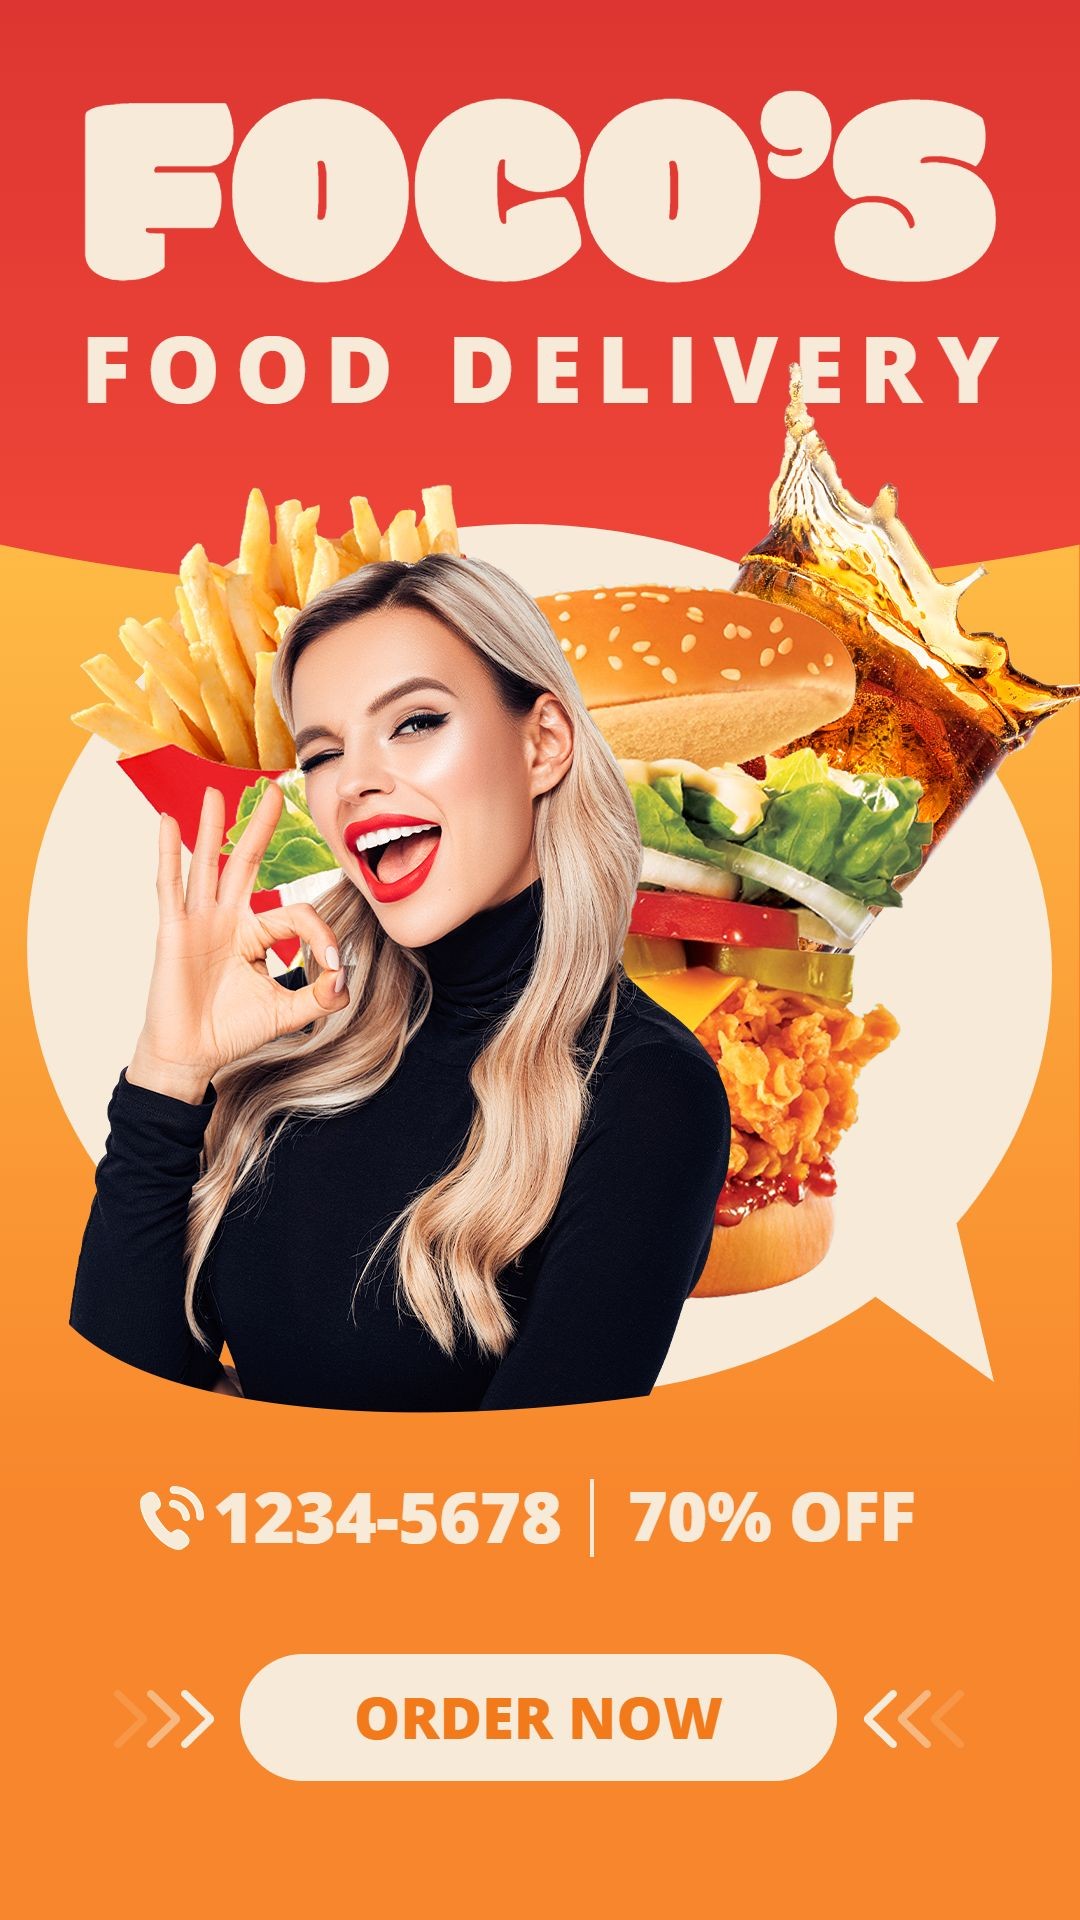 Burger Fries Fast Food Delivery Discount Promo Creative Campaign Marketing Ecommerce Story预览效果